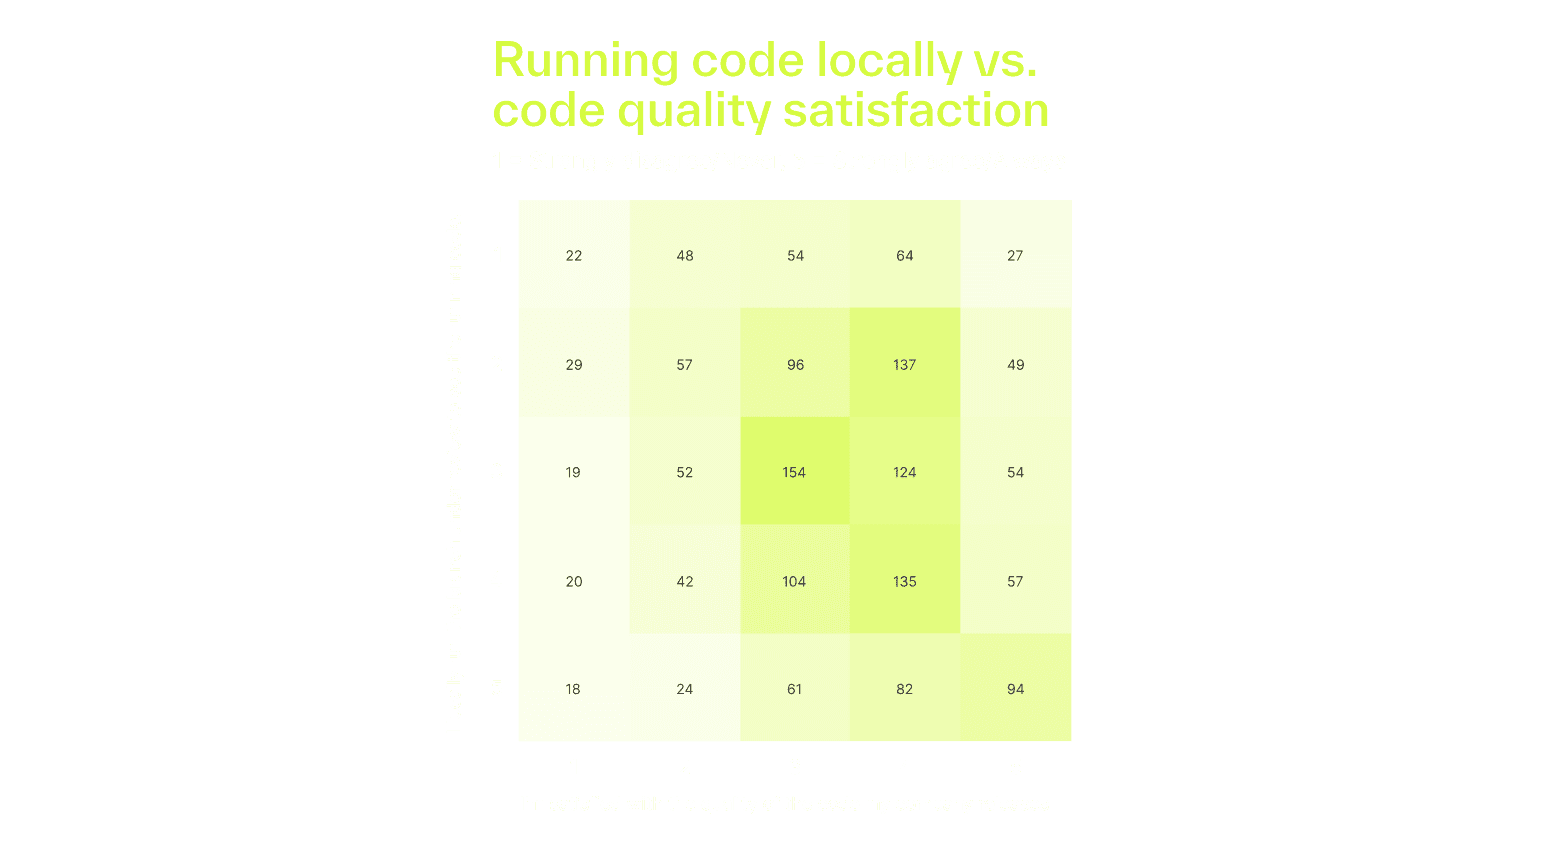 Correlation between running a PR locally and code quality satisfaction